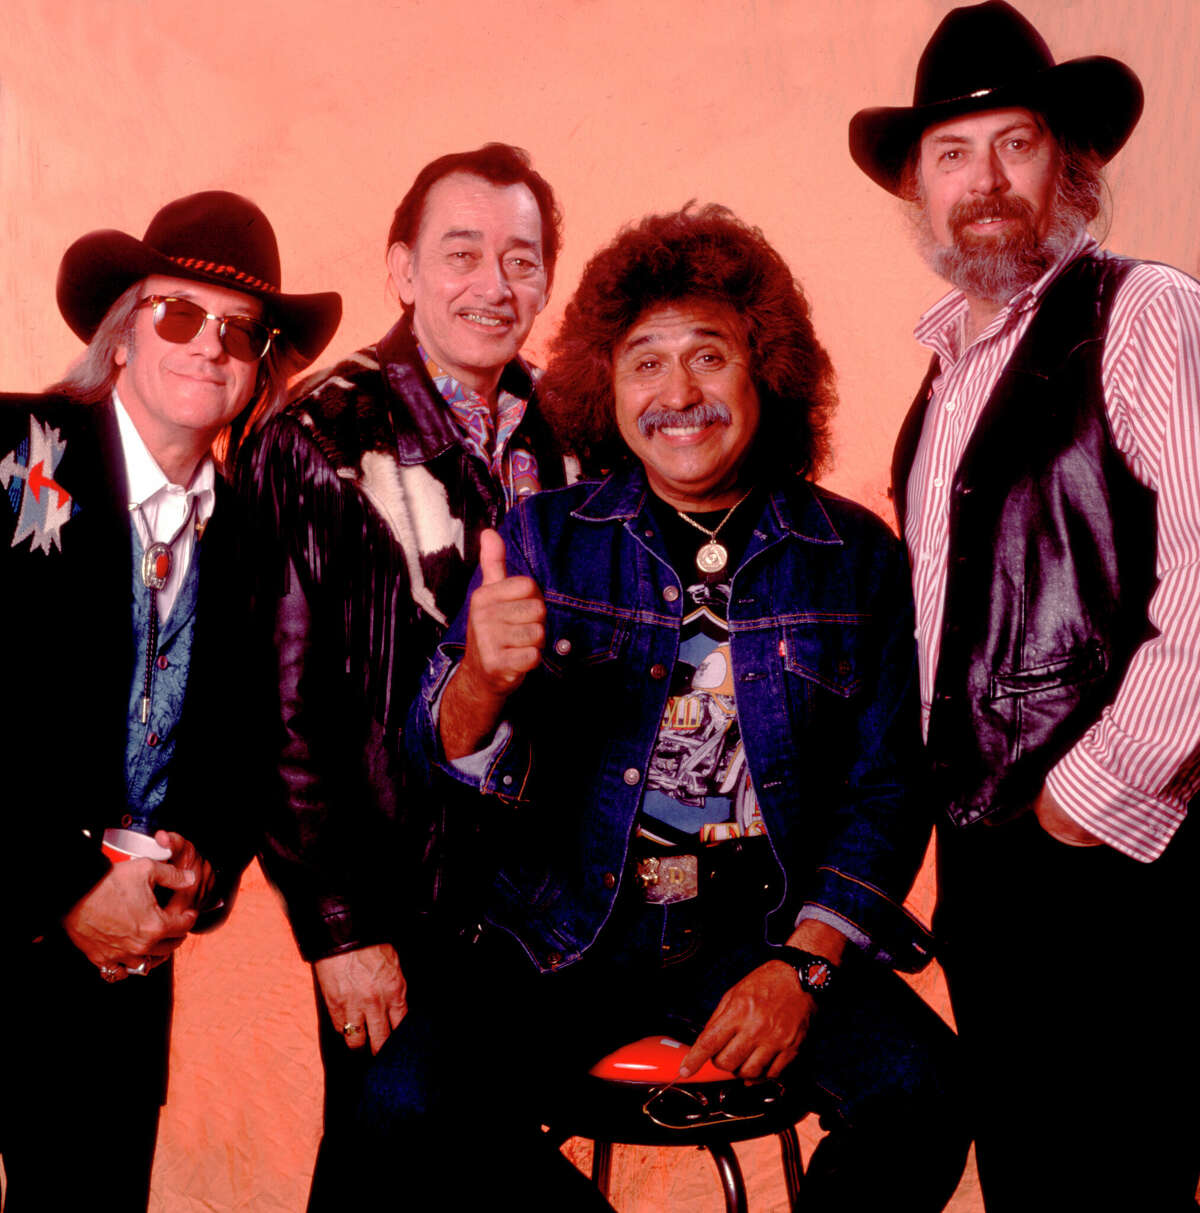 Portrait of the members of American Tejano group Texas Tornados as they pose backstage at the Farm Aid benefit concert, Dallas, Texas, March 14, 1992. Pictured are Doug Sahm, Flaco Jimenez, Freddie Fender, and Augie Myers. (Photo by Paul Natkin/Getty Images)